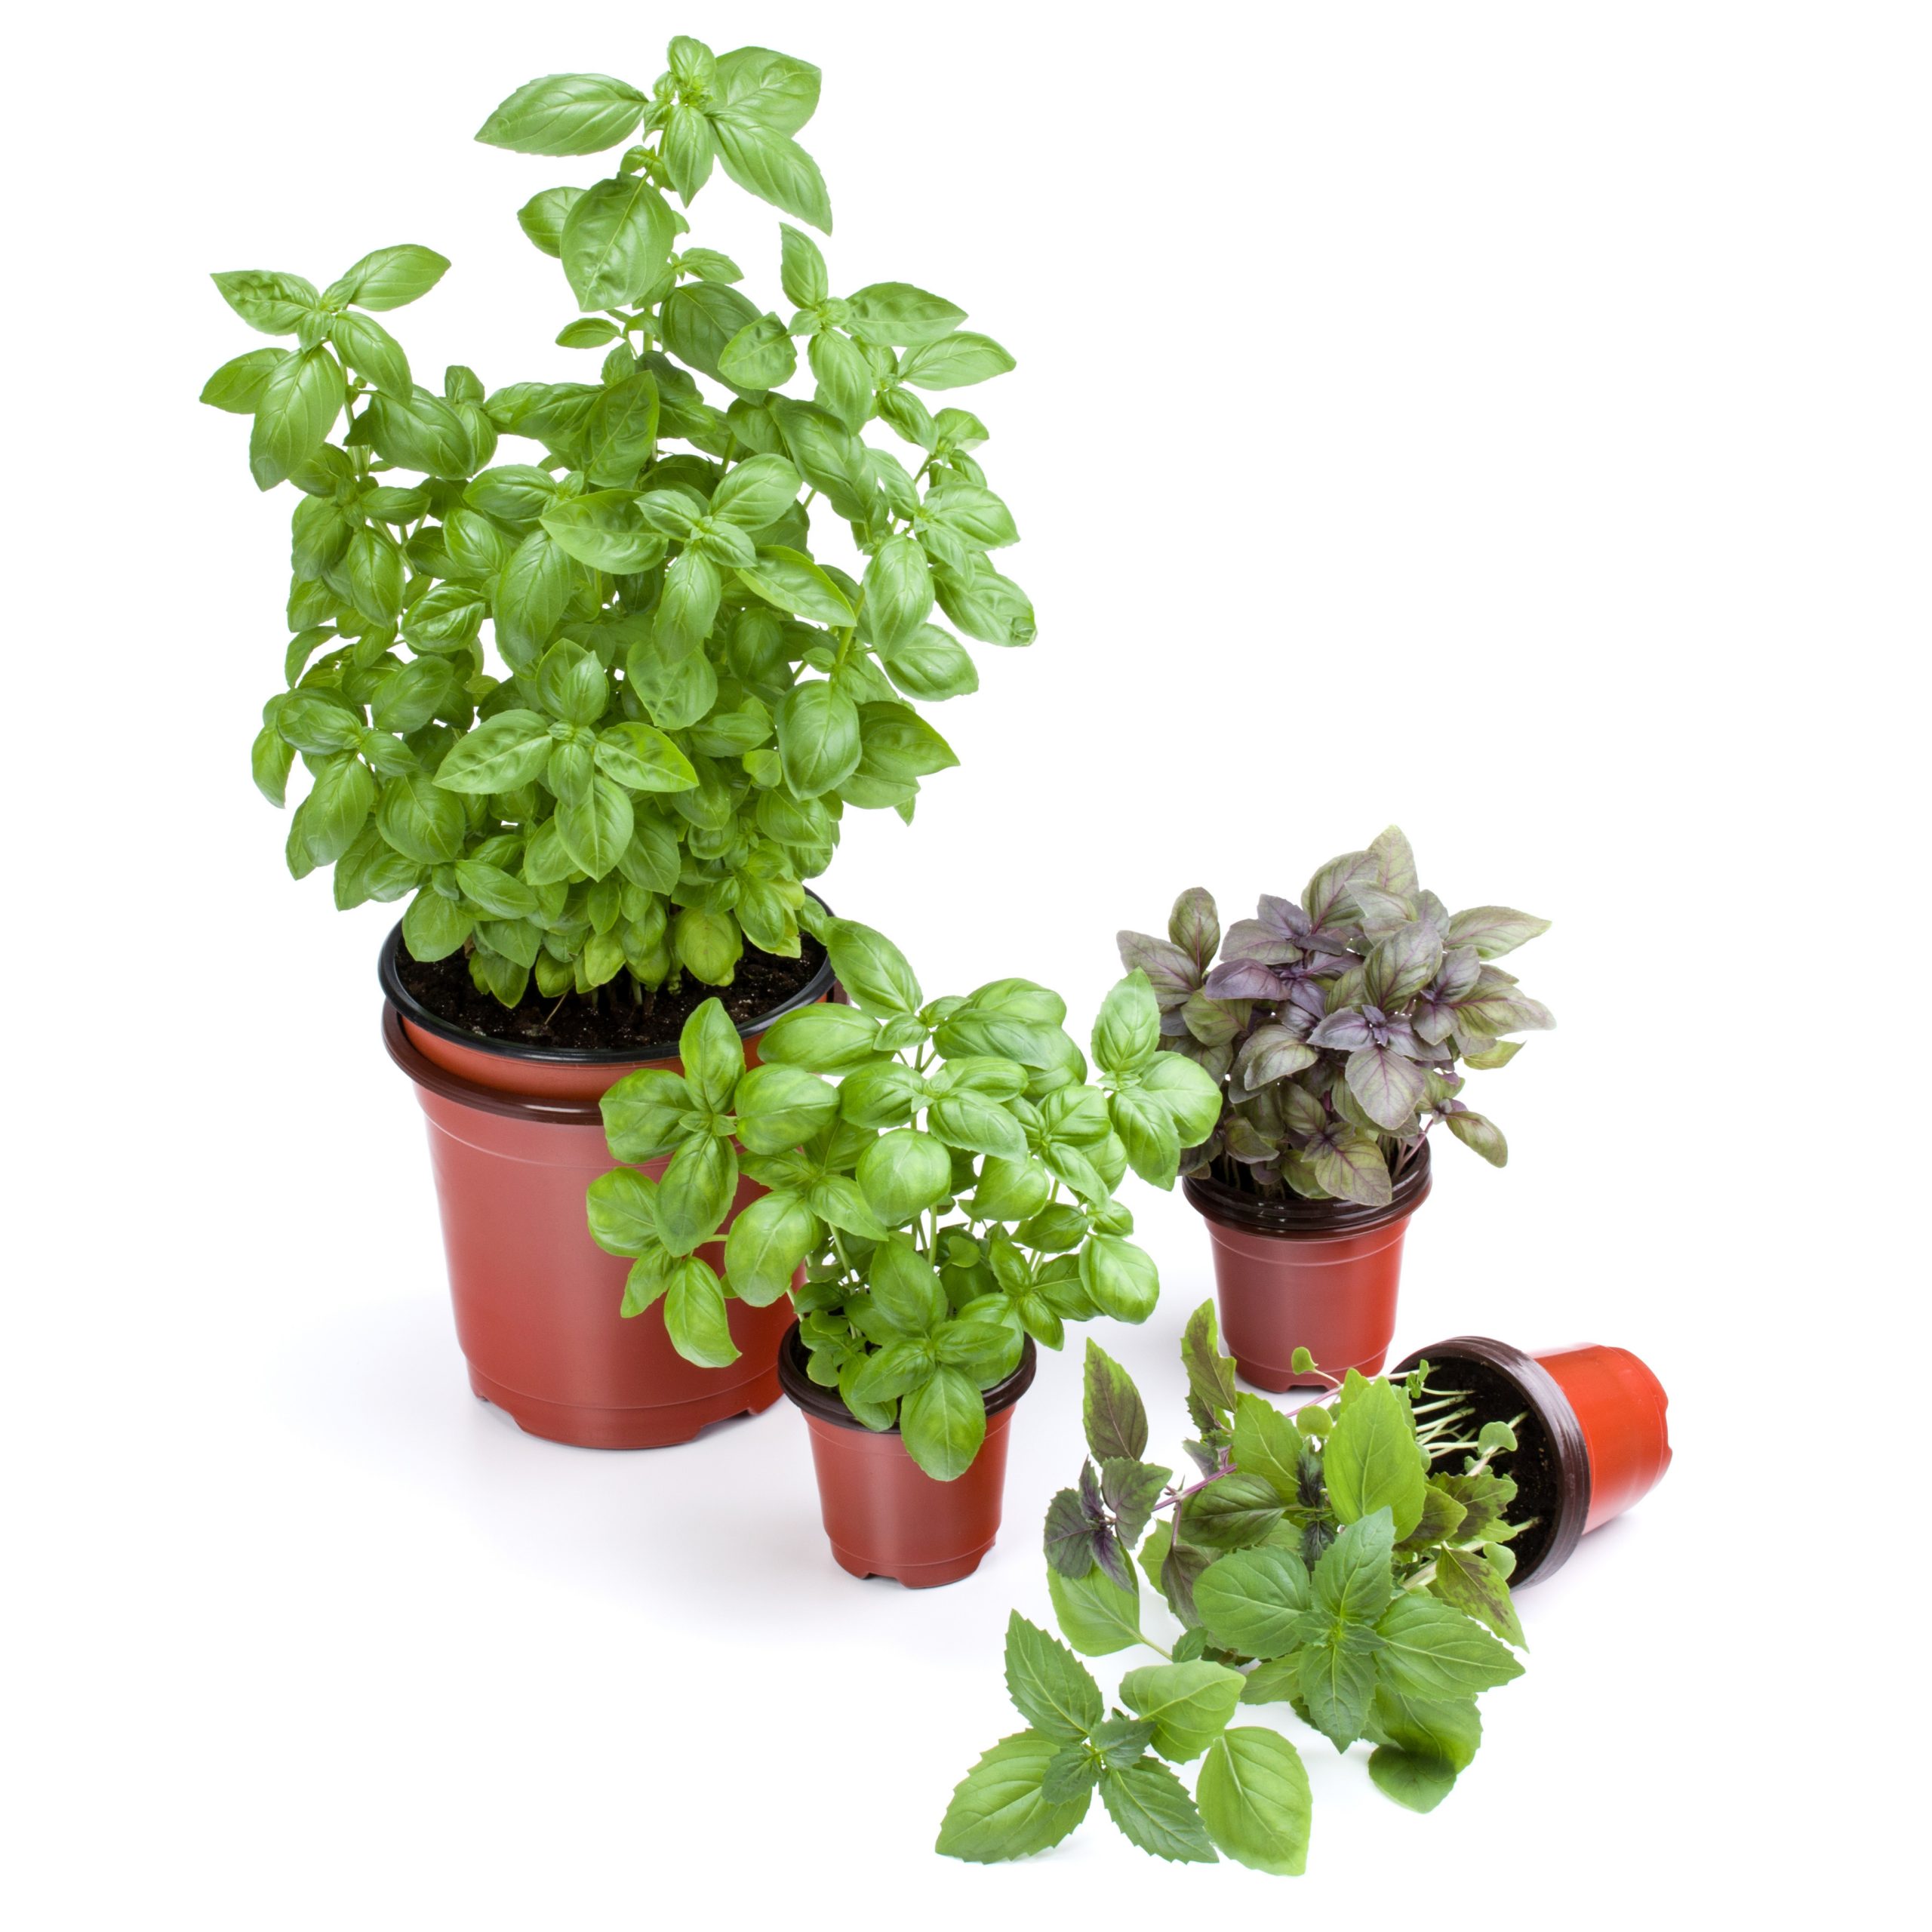 Know when to move your plants indoors